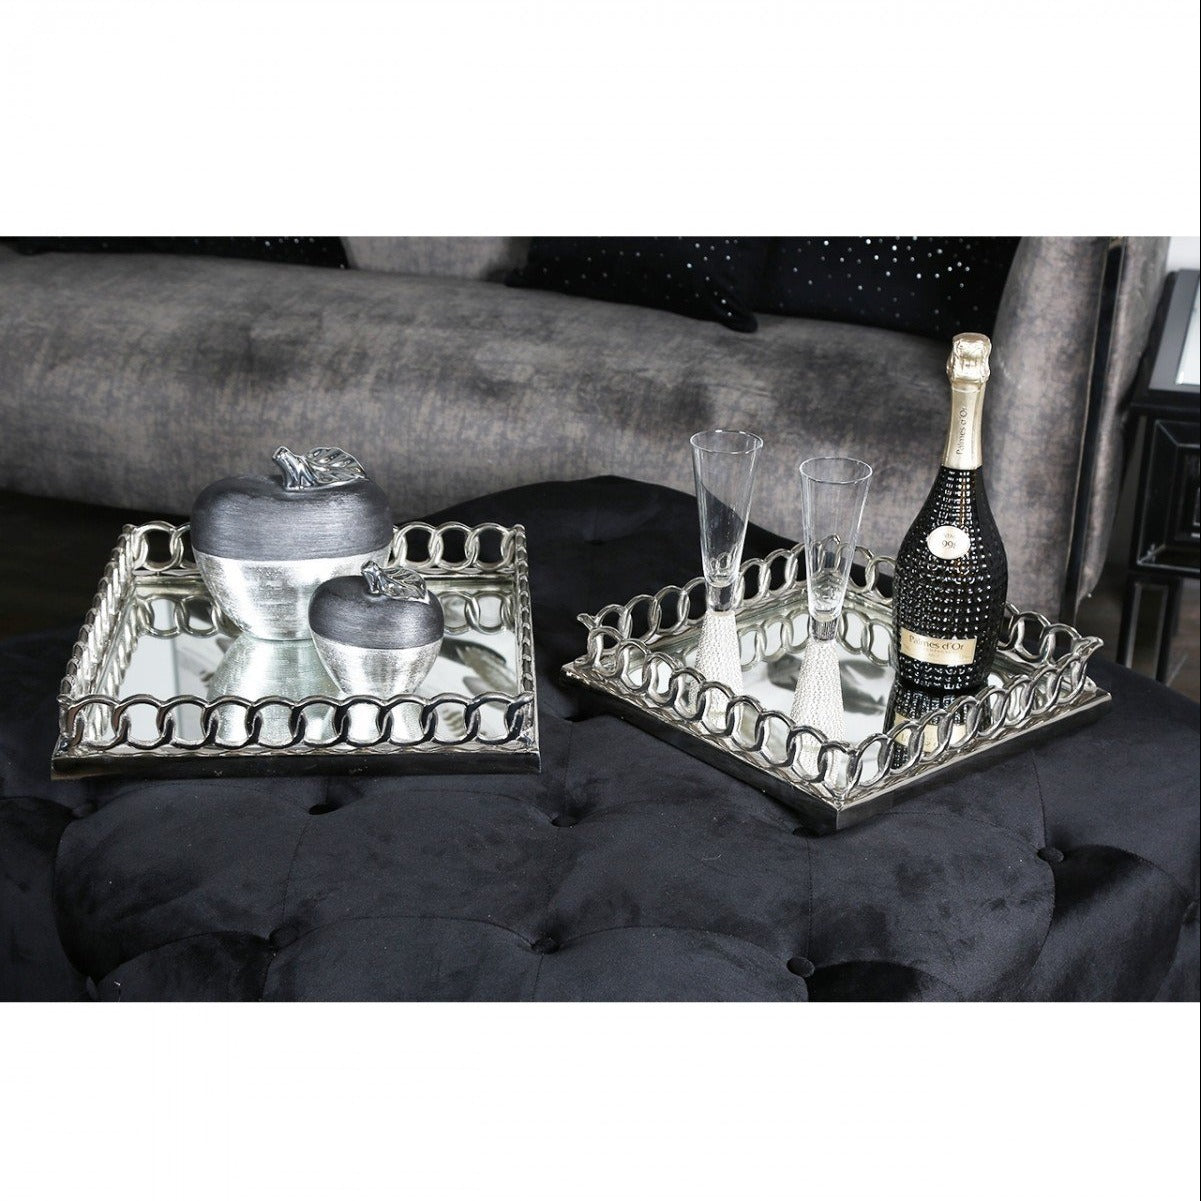 Square Chain Tray (2 sizes)